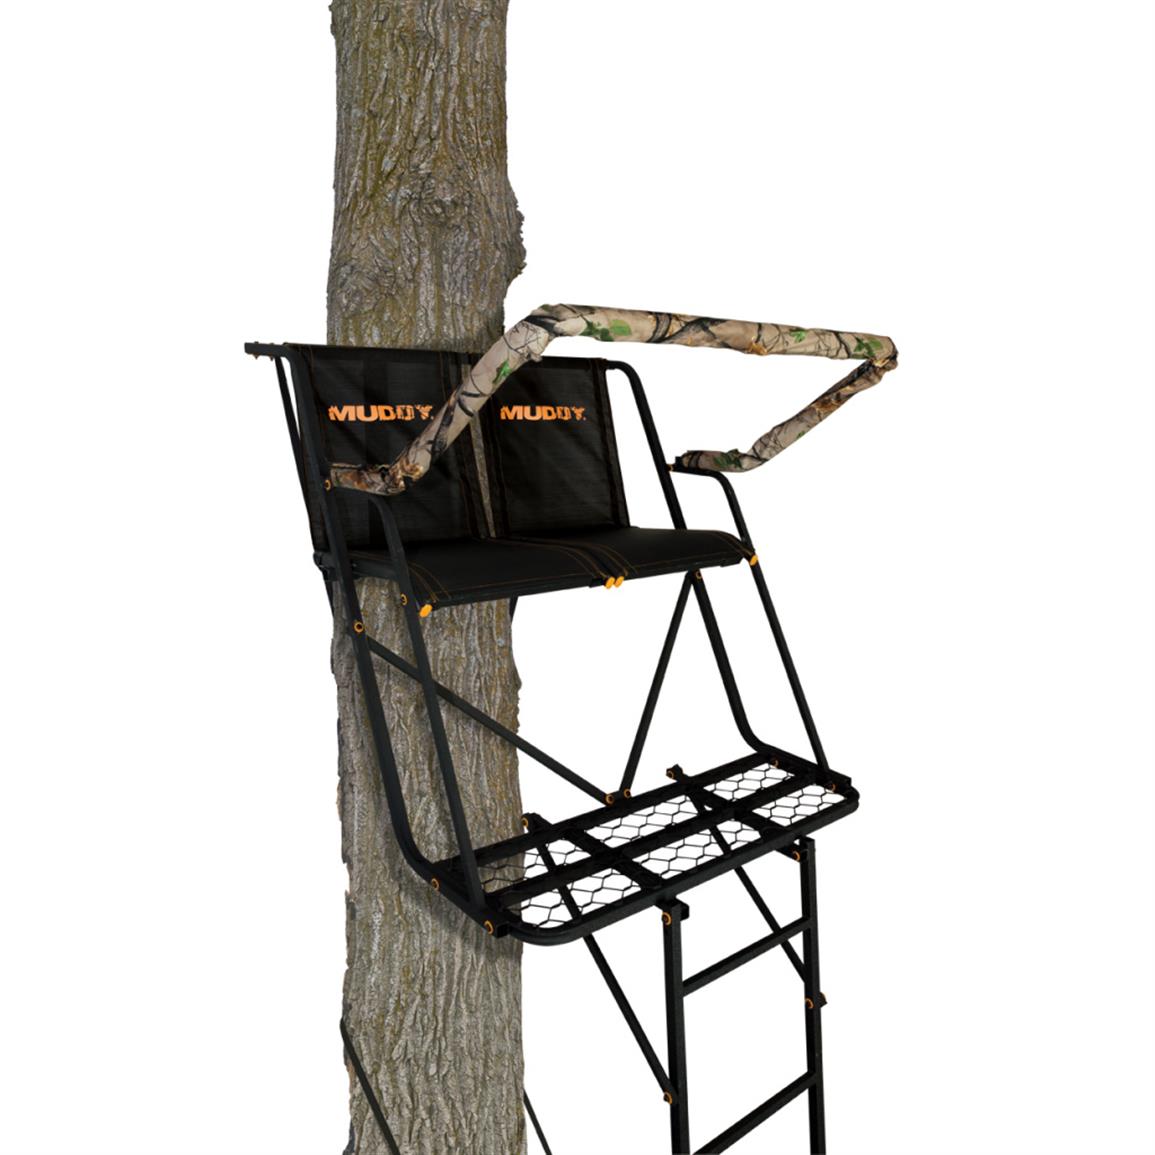 Muddy The SideKick Ladder Tree Stand, 2 Man, 16' 654195, Ladder Tree Stands at Sportsman's Guide